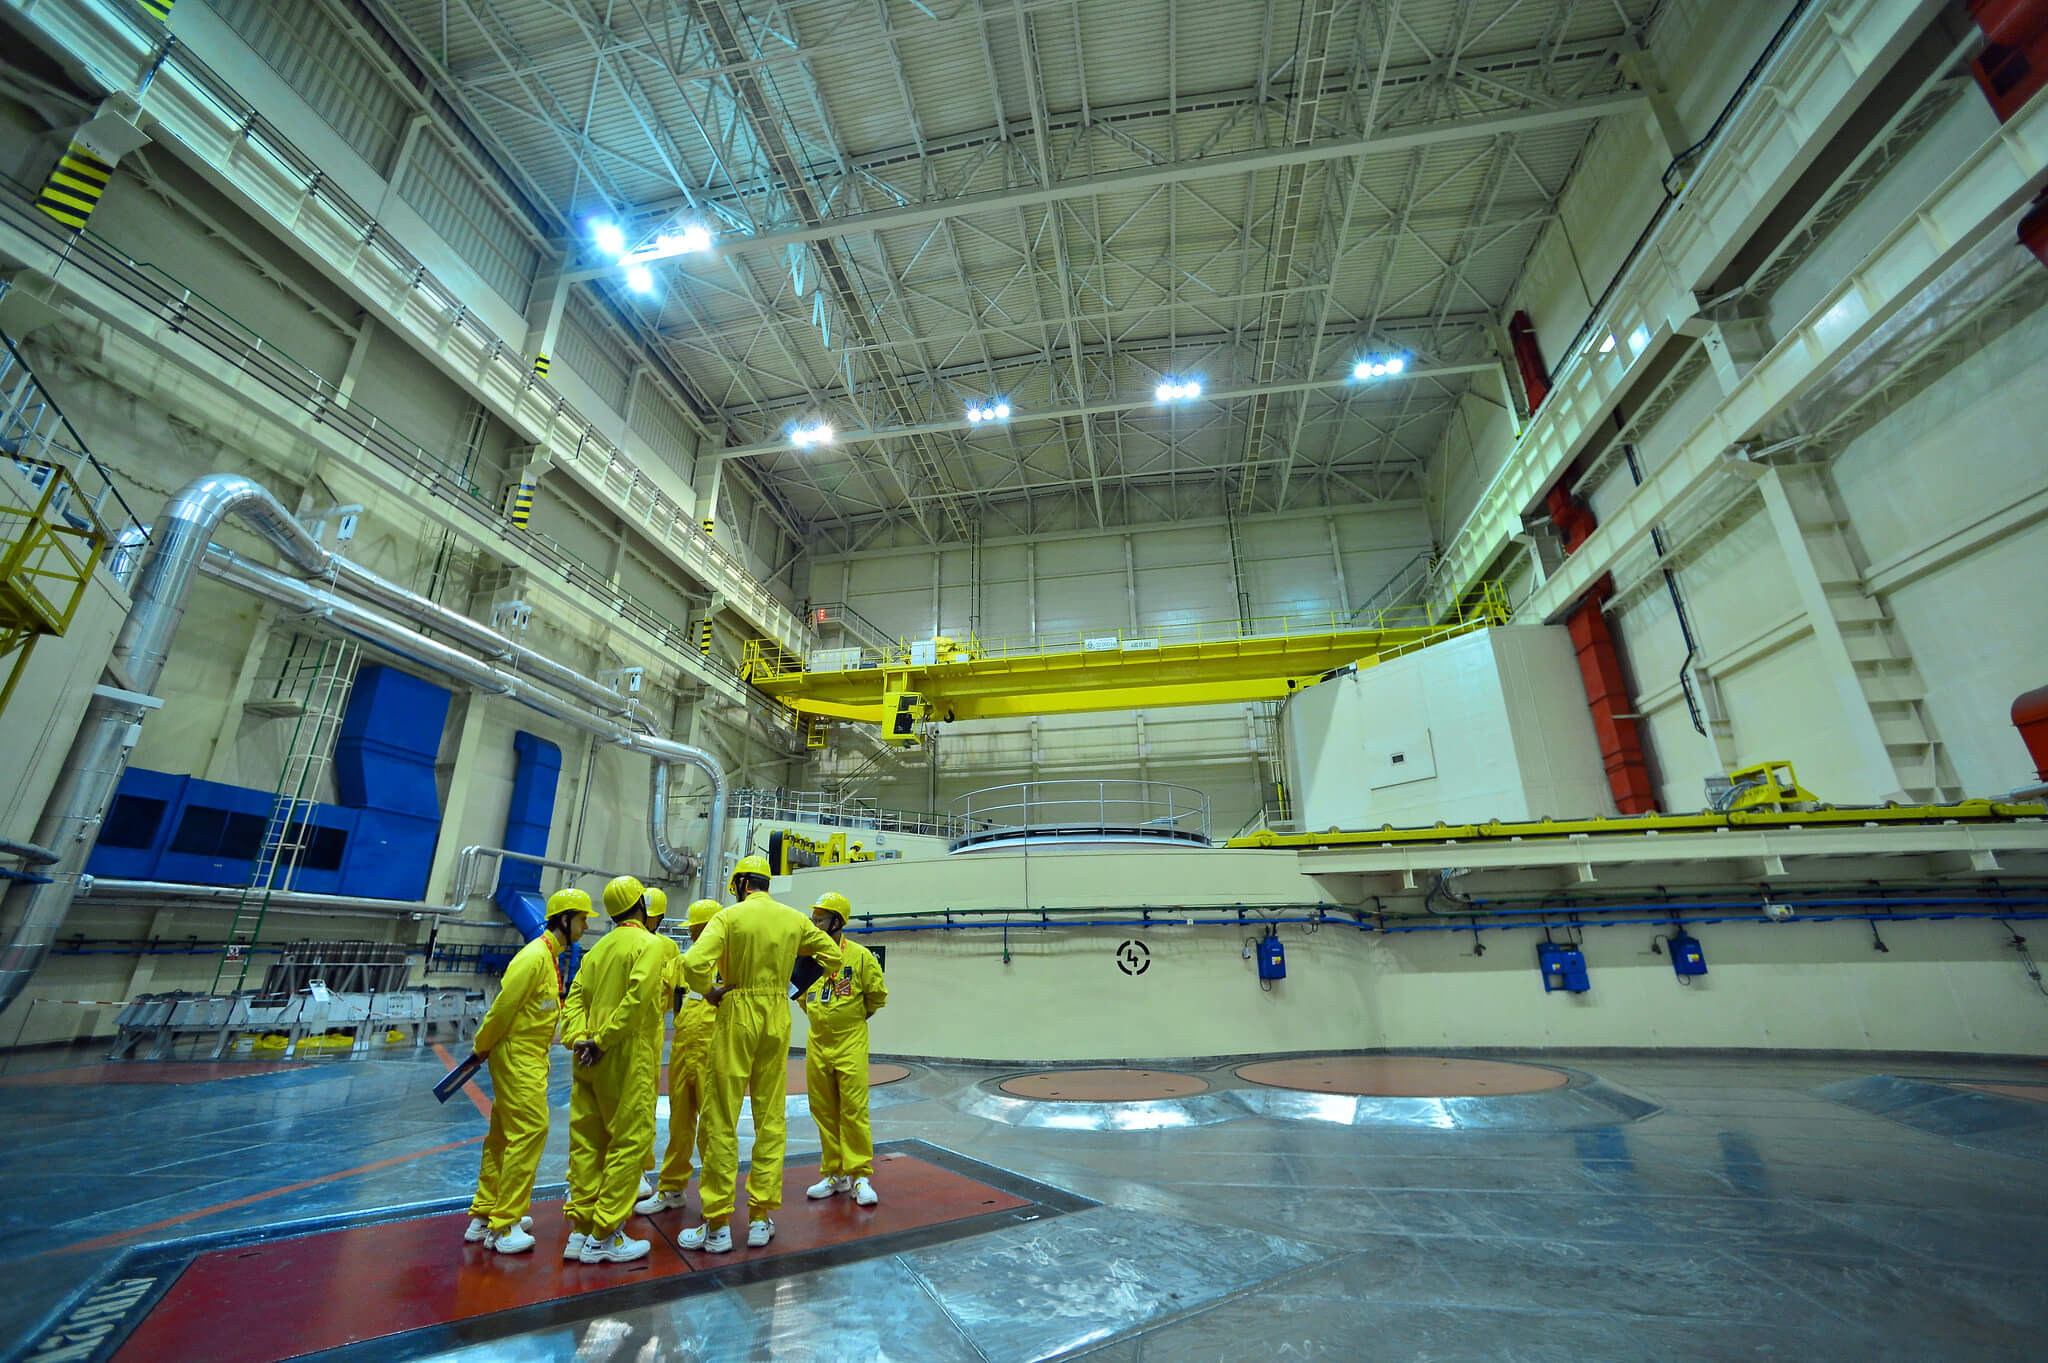 Training exercise at the Dukovany nuclear power plant the Czech Republic in 2015. © IAEA Imagebank